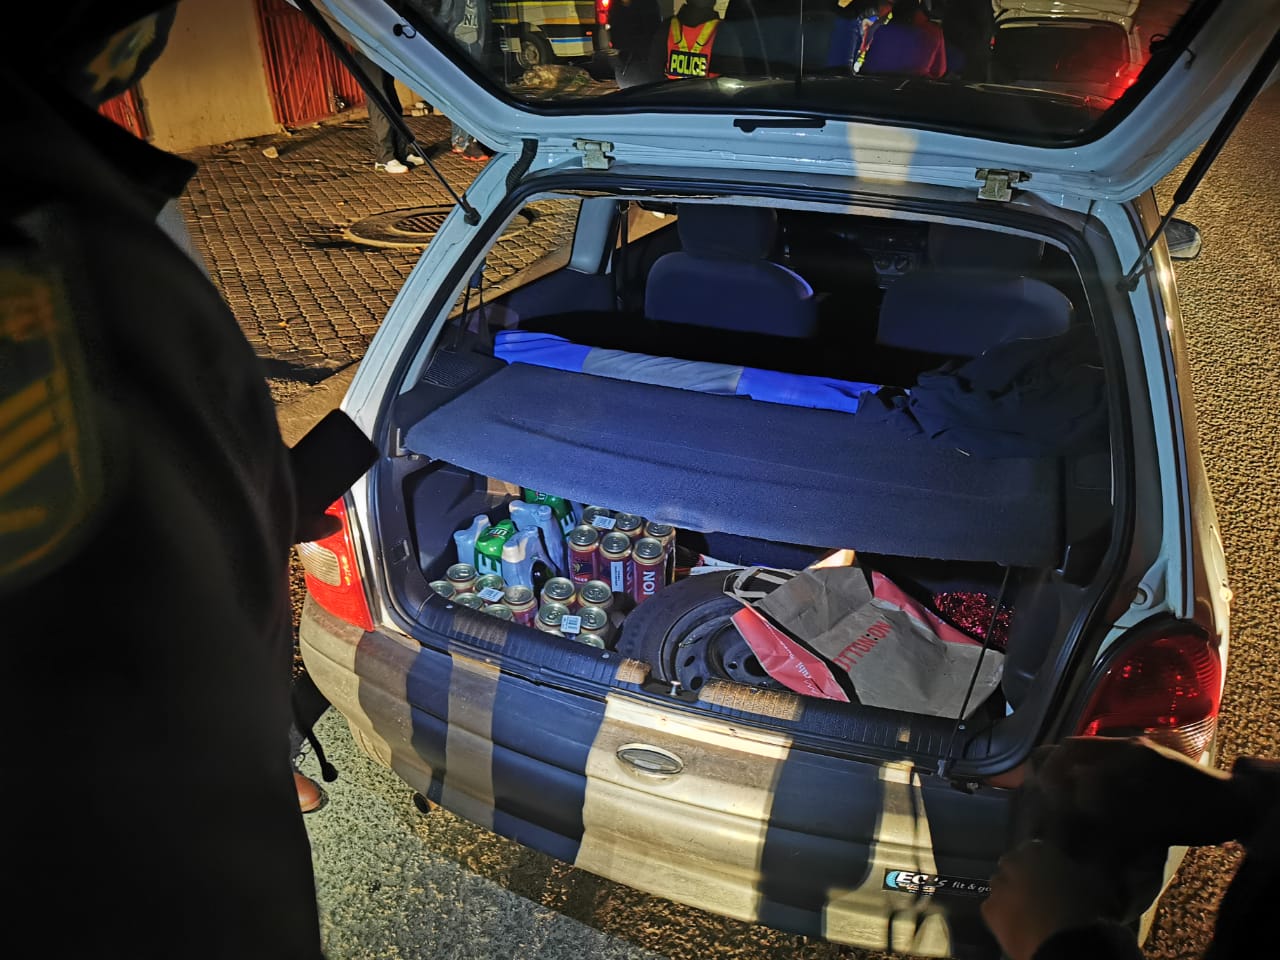 Police arrested two motorists for transporting liquor and were charged in terms of the DMA regulations in Makhanda - Eastern Cape